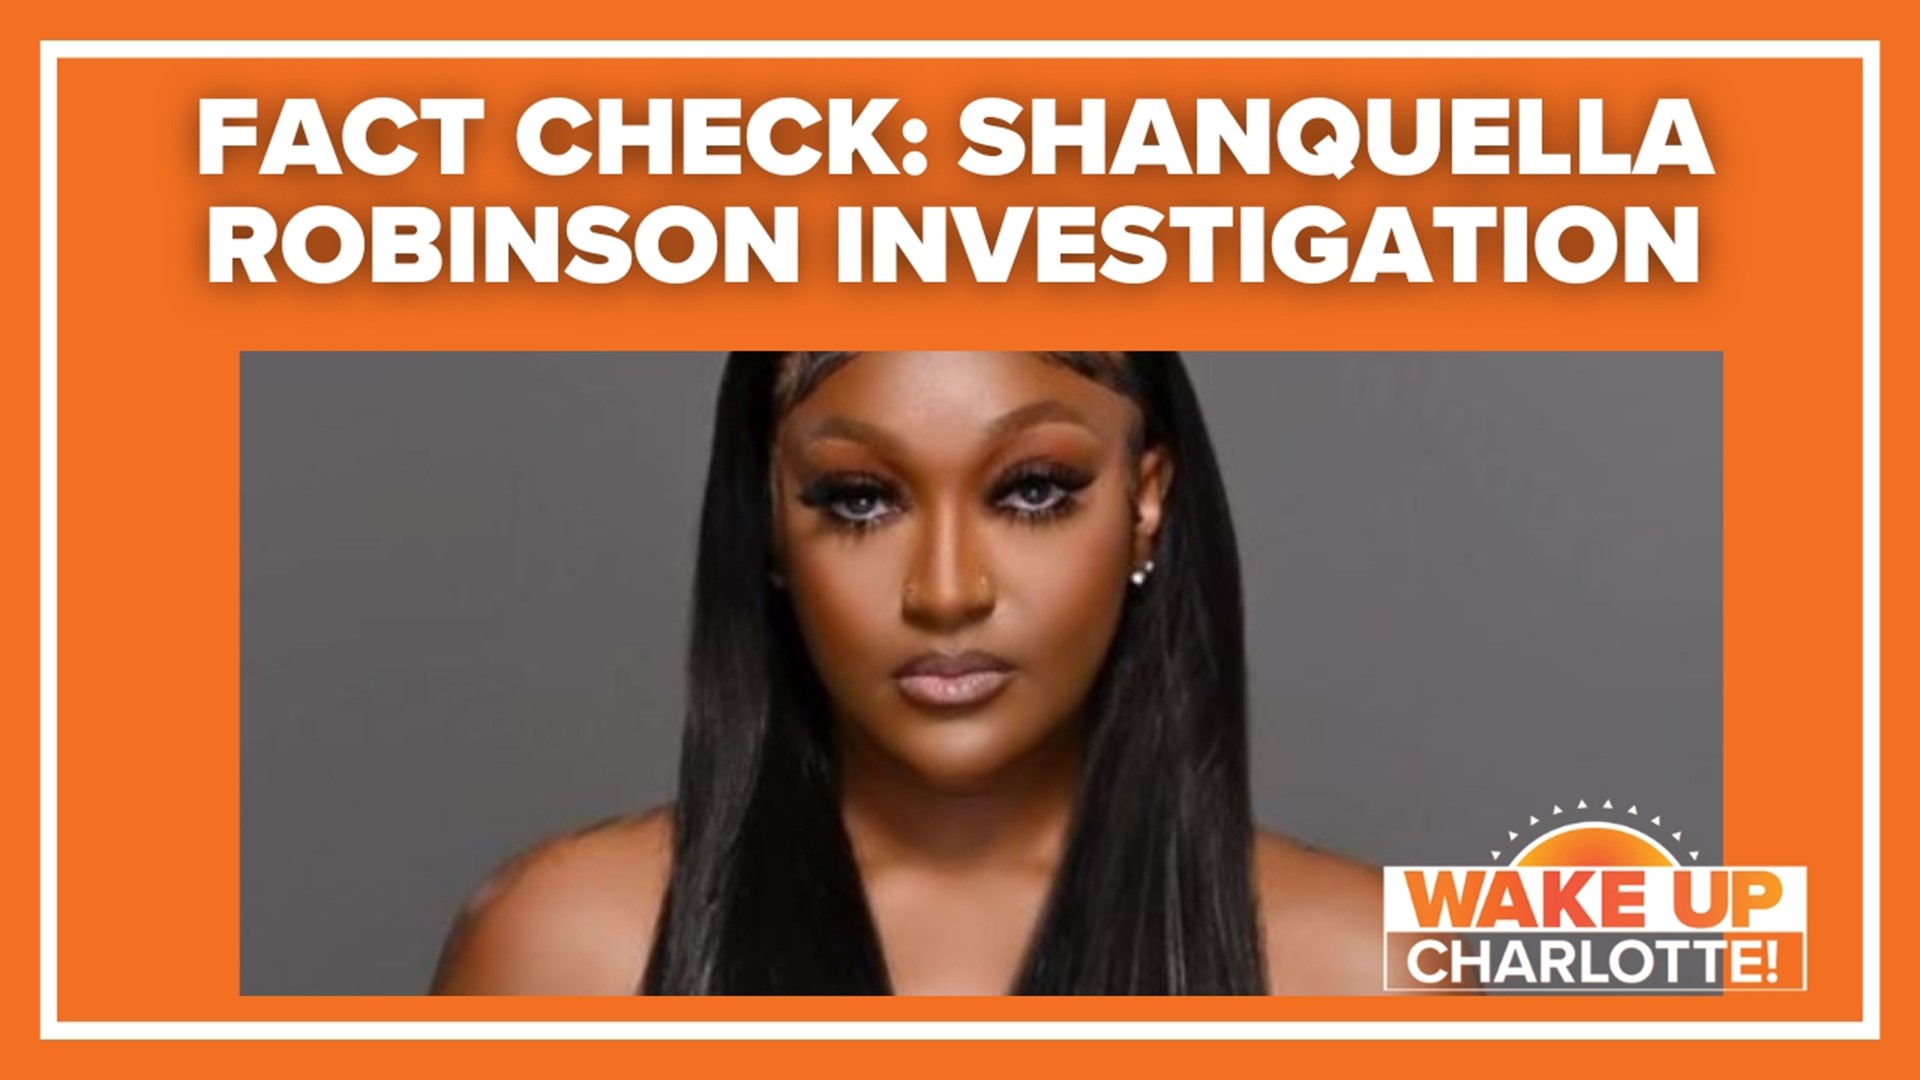 As Shanquella Robinson's family continues to search for answers to the death of their daughter, some are claiming a suspect has been arrested in the case.